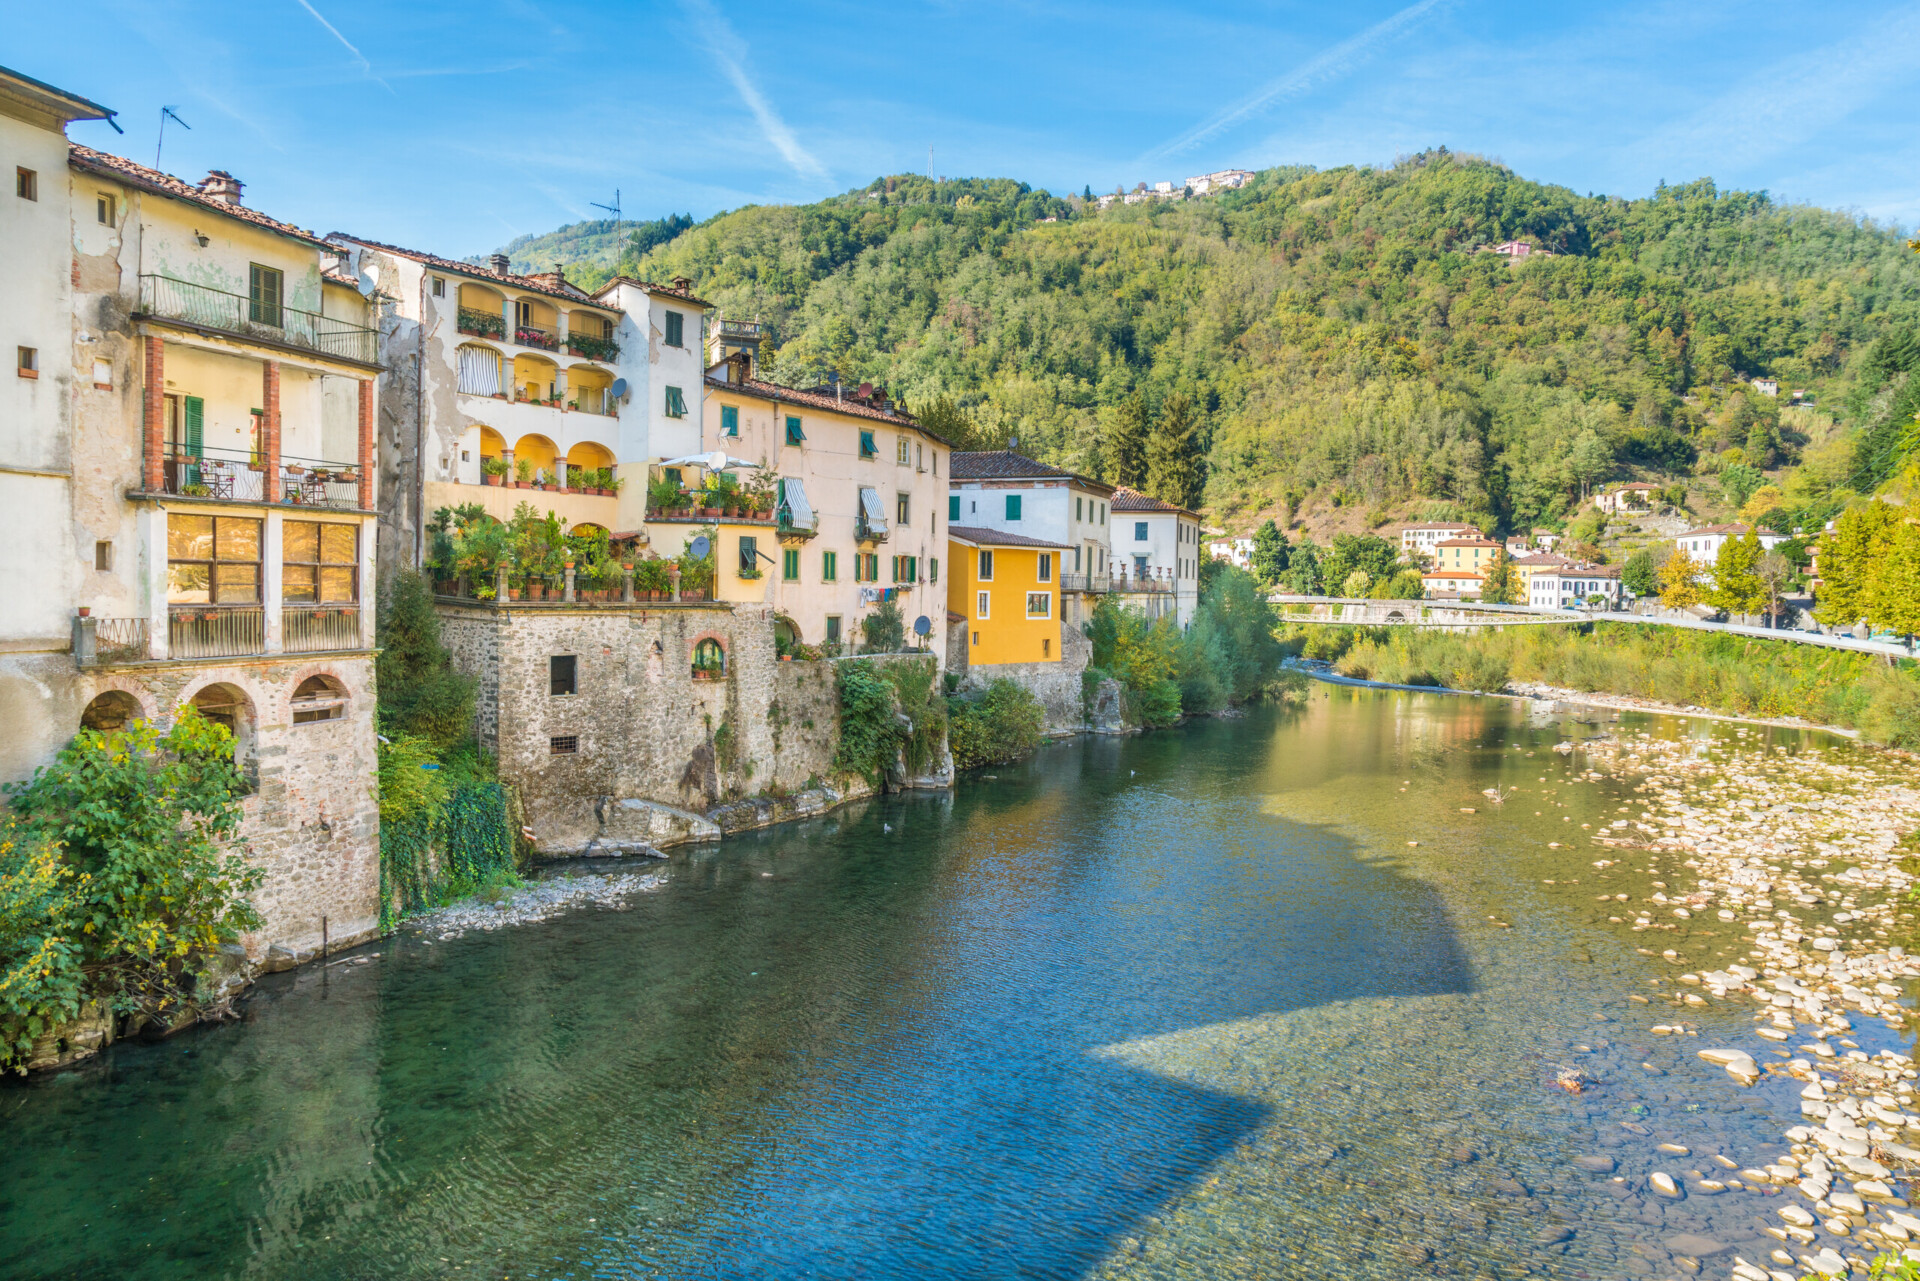 The picturesque town of Bagni di Lucca on a sunny day. Near Lucca, in Tuscany, Italy.